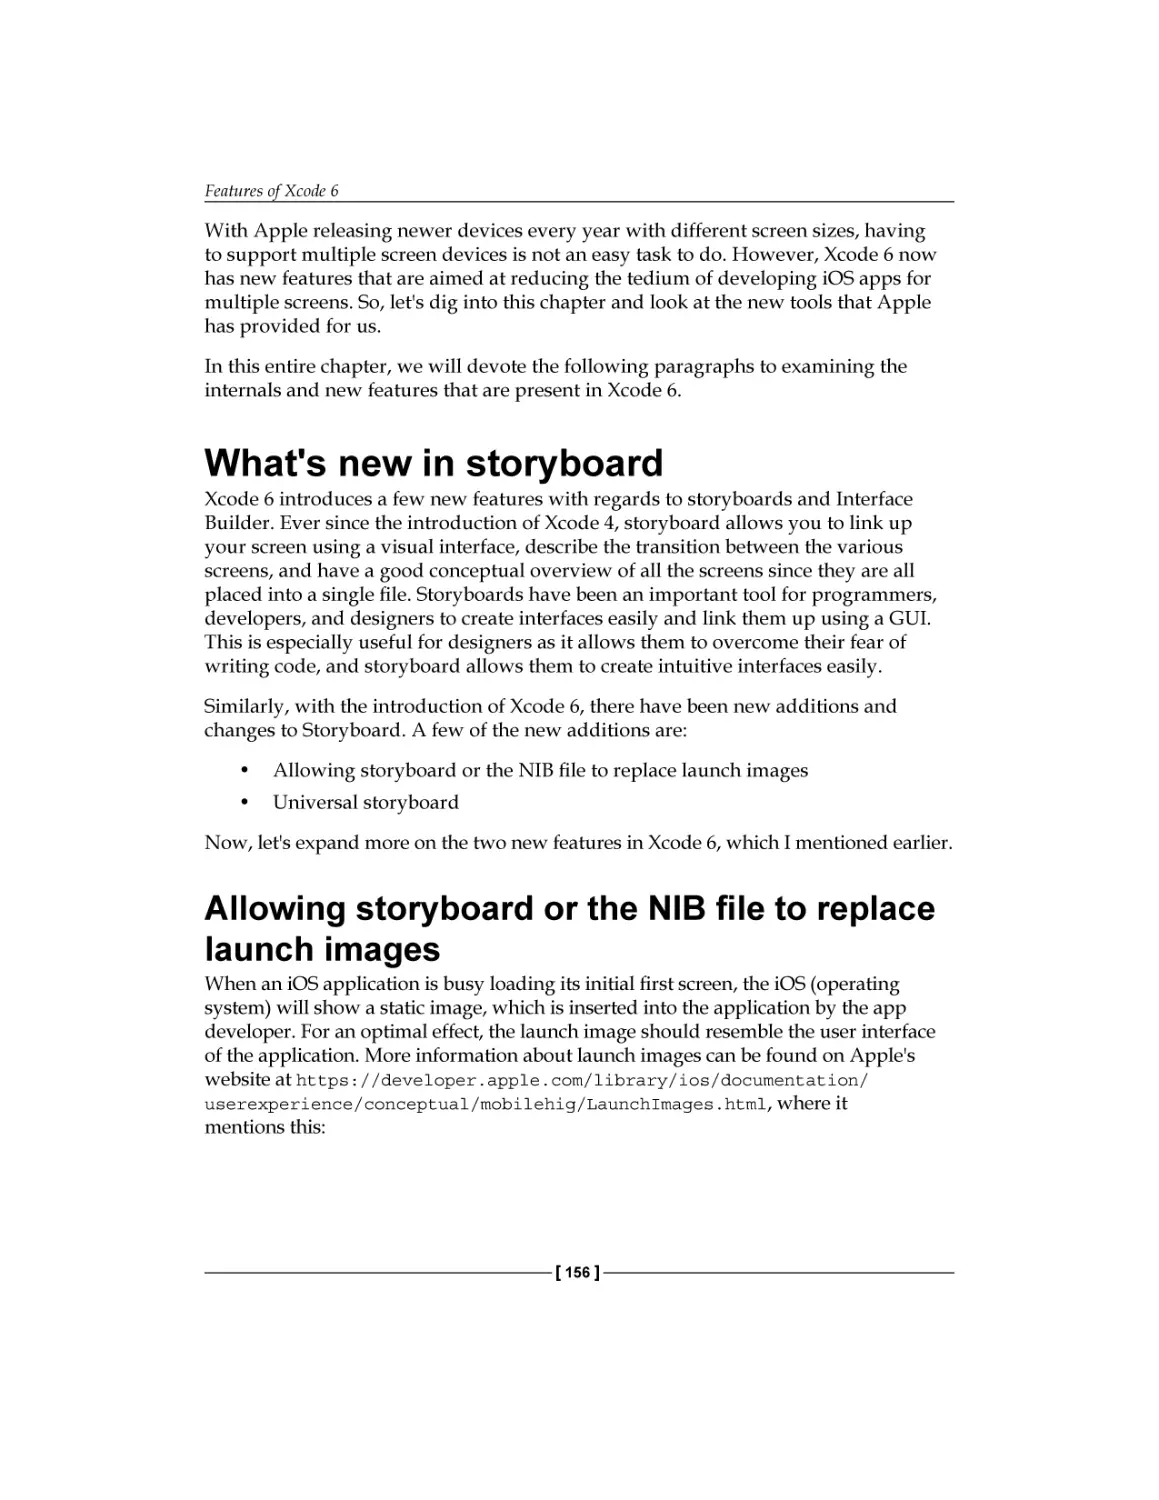 What's new in storyboard
Allowing storyboard or the NIB file to replace launch images